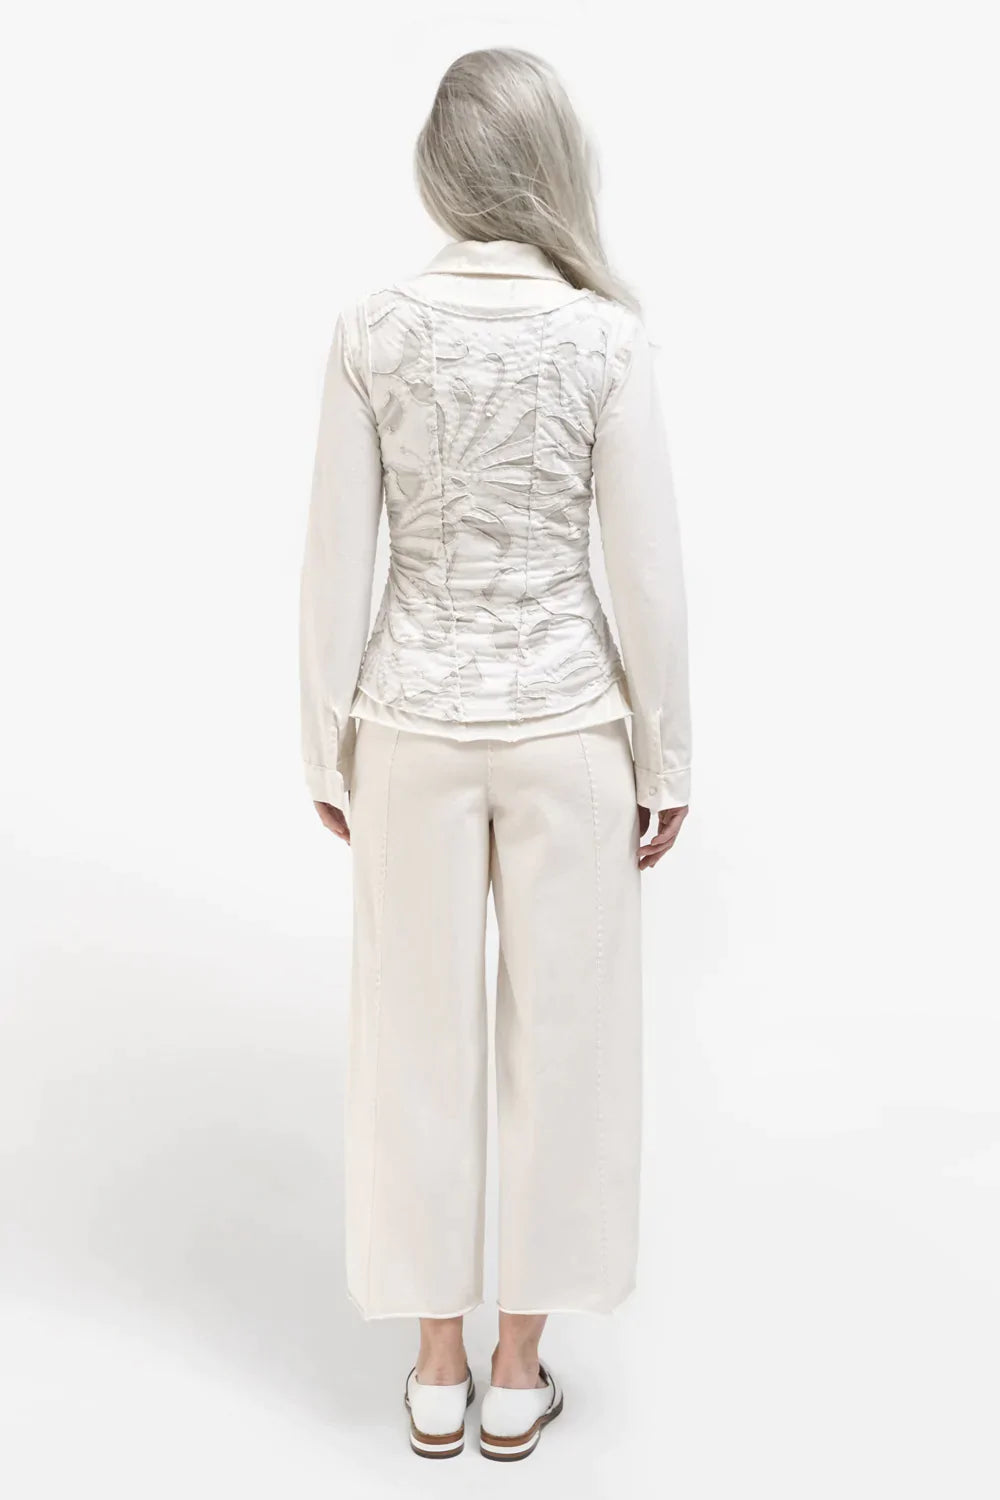 The School of Making model in Crop Pants and Corset in white made with 100% organic cotton. 